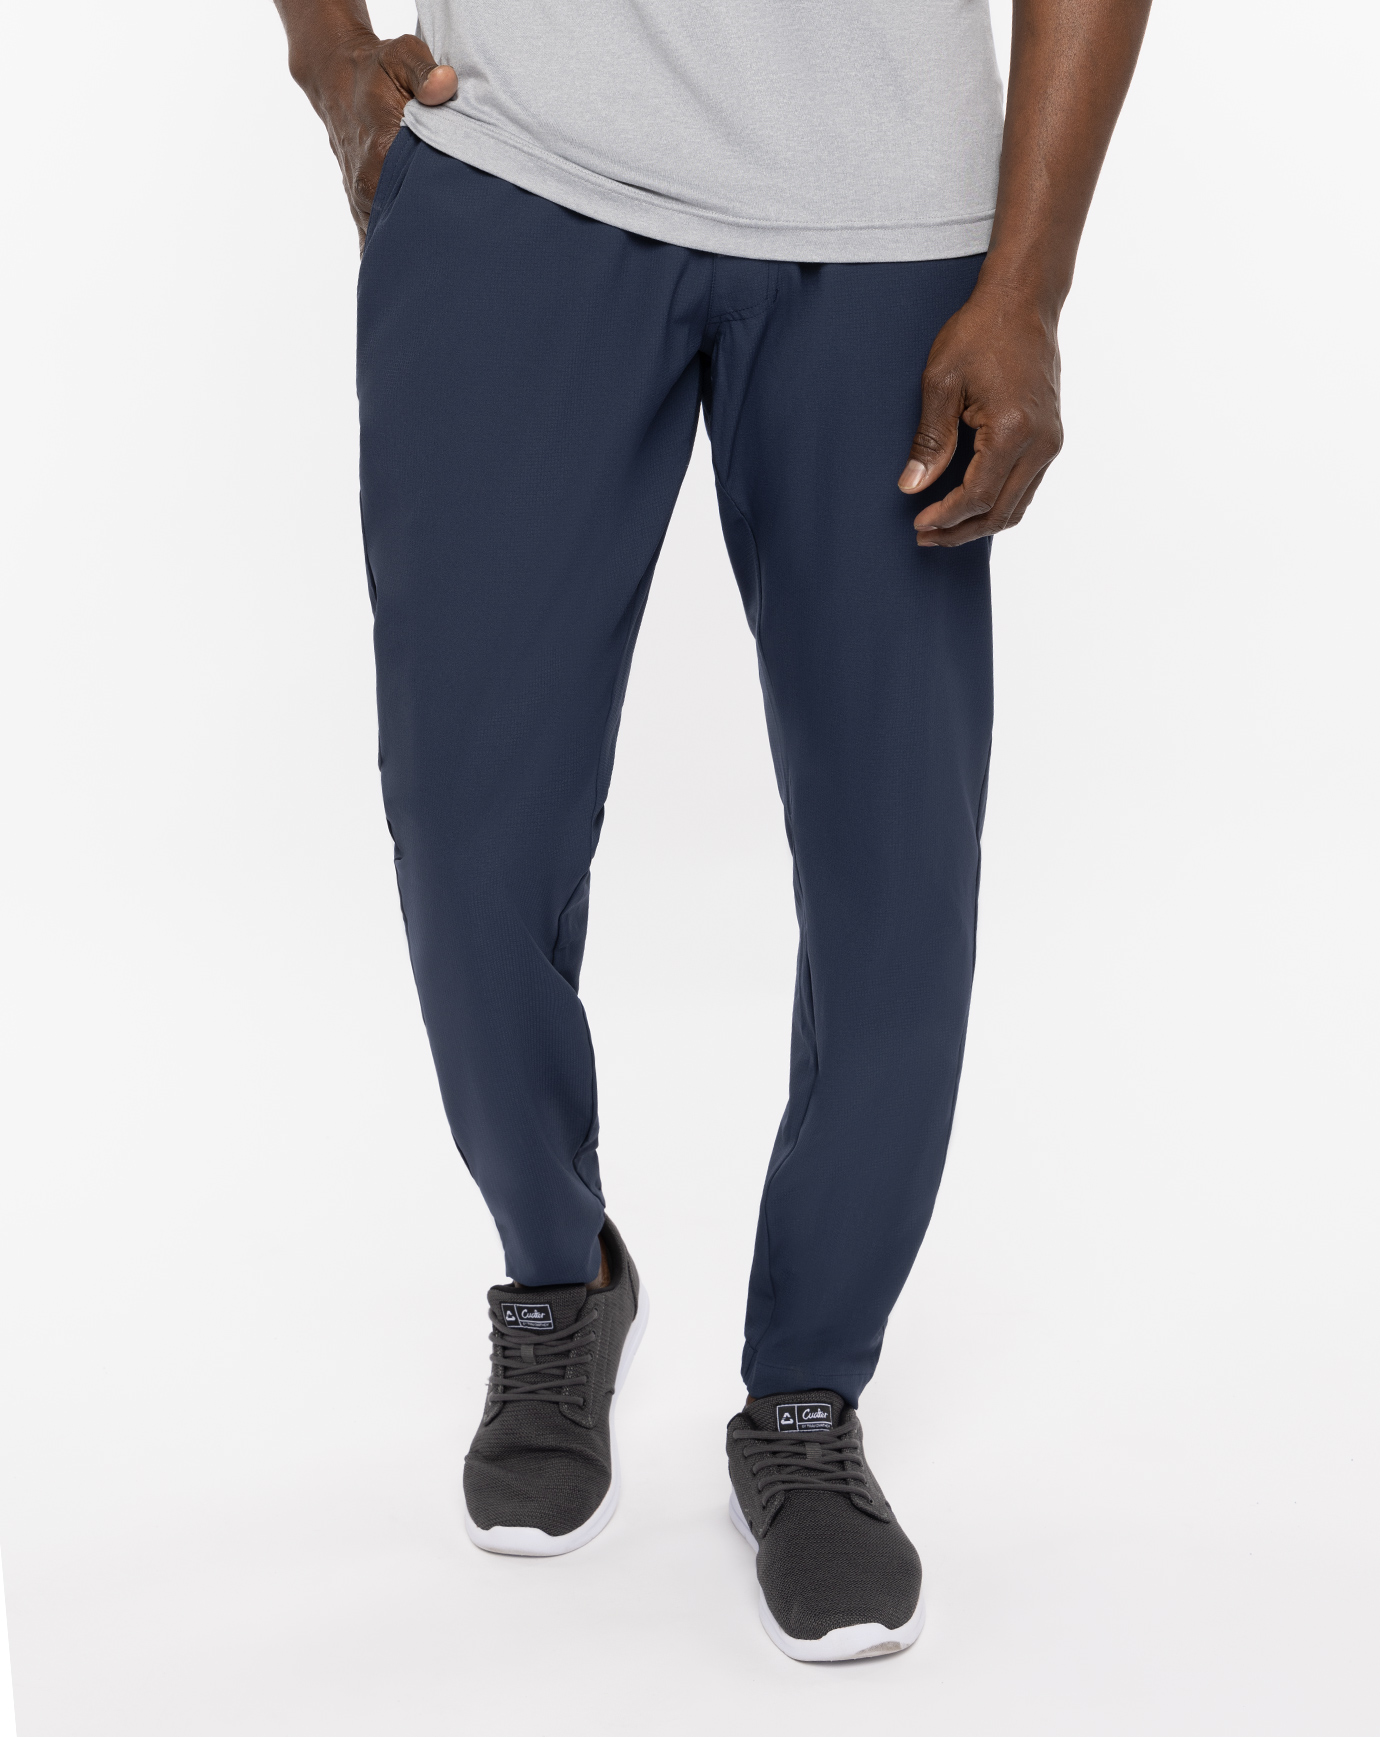 TRAVEL ACTIVE PANT 2.0  1